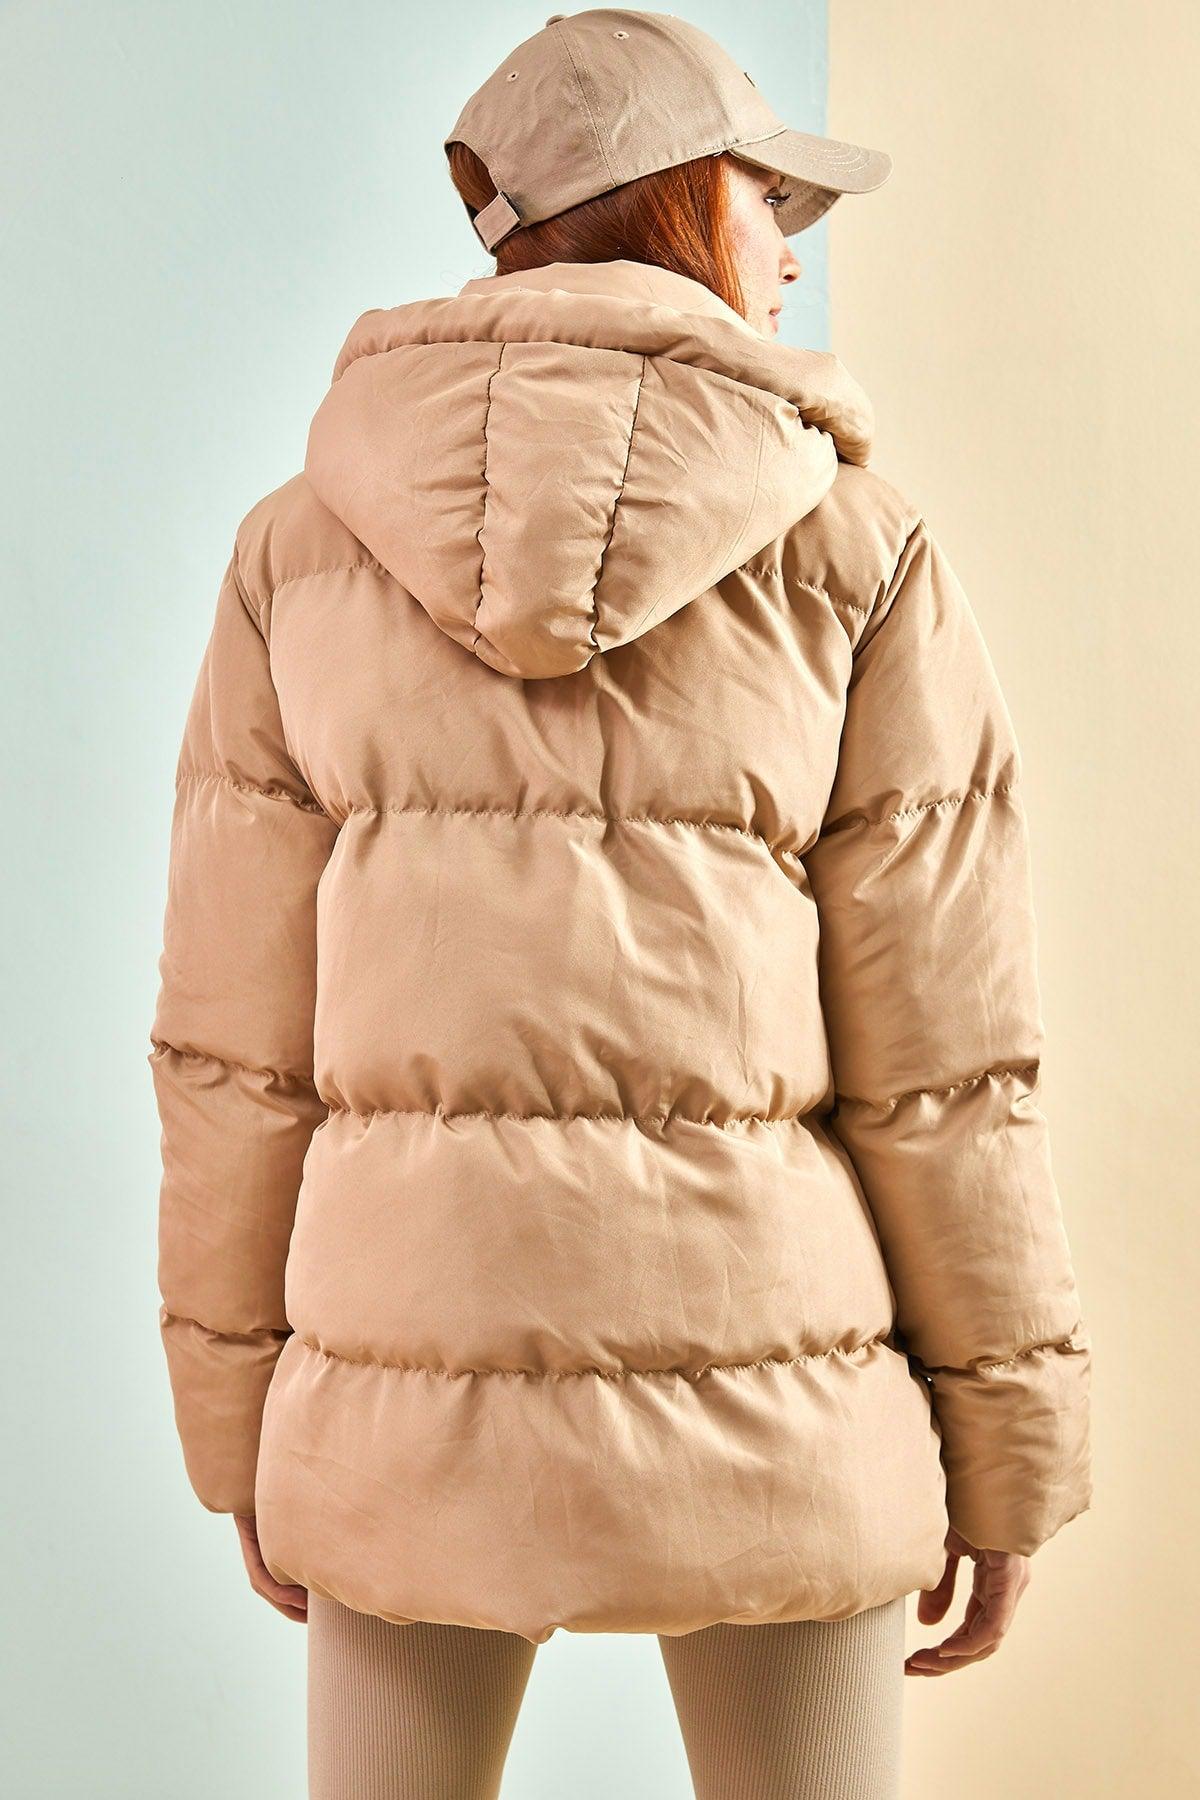 Women's Hooded Long Down Jacket with Lace-Up - Swordslife